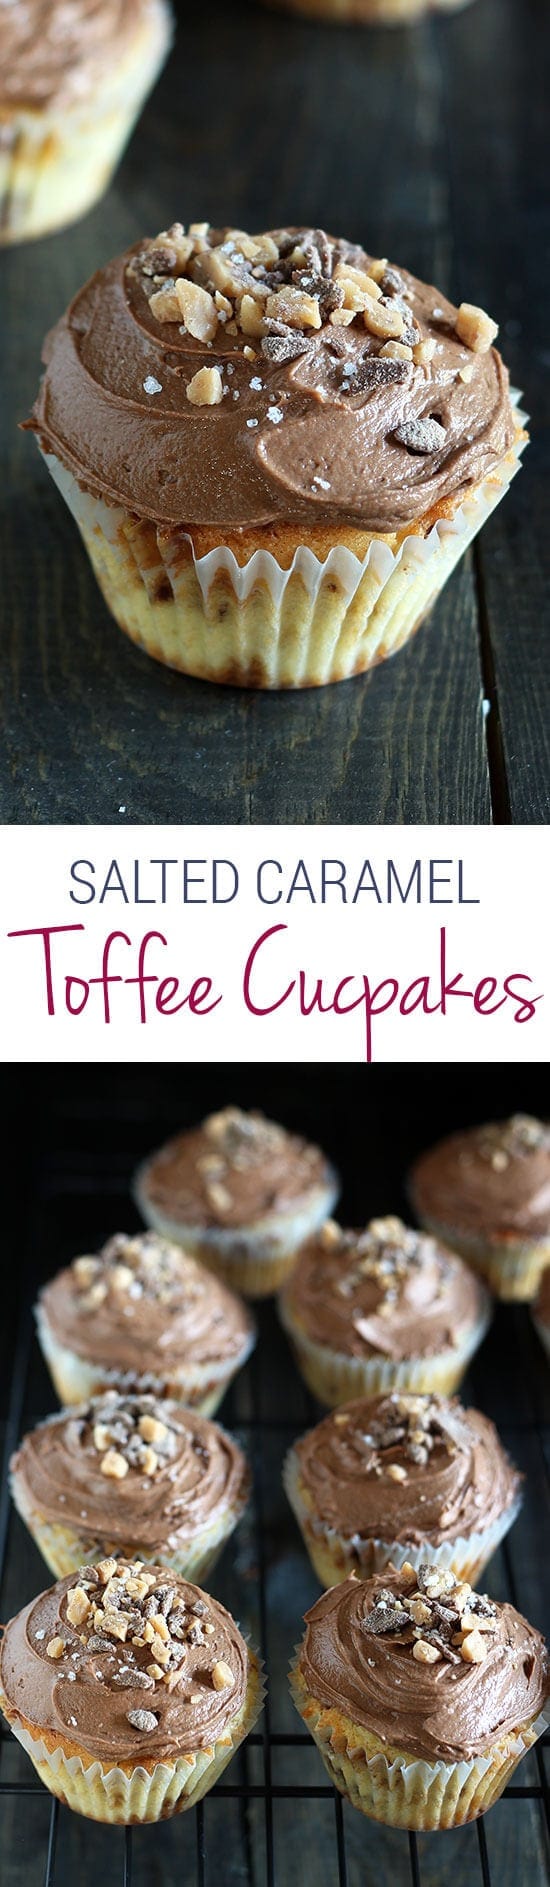 Does life get better than this?! Salted Caramel Toffee Cupcakes are the perfect salty sweet treat! Salted Caramel Toffee Cupcakes are the ultimate salty sweet treat! Vanilla cupcake loaded with toffee bits with a homemade chocolate caramel frosting. YES!